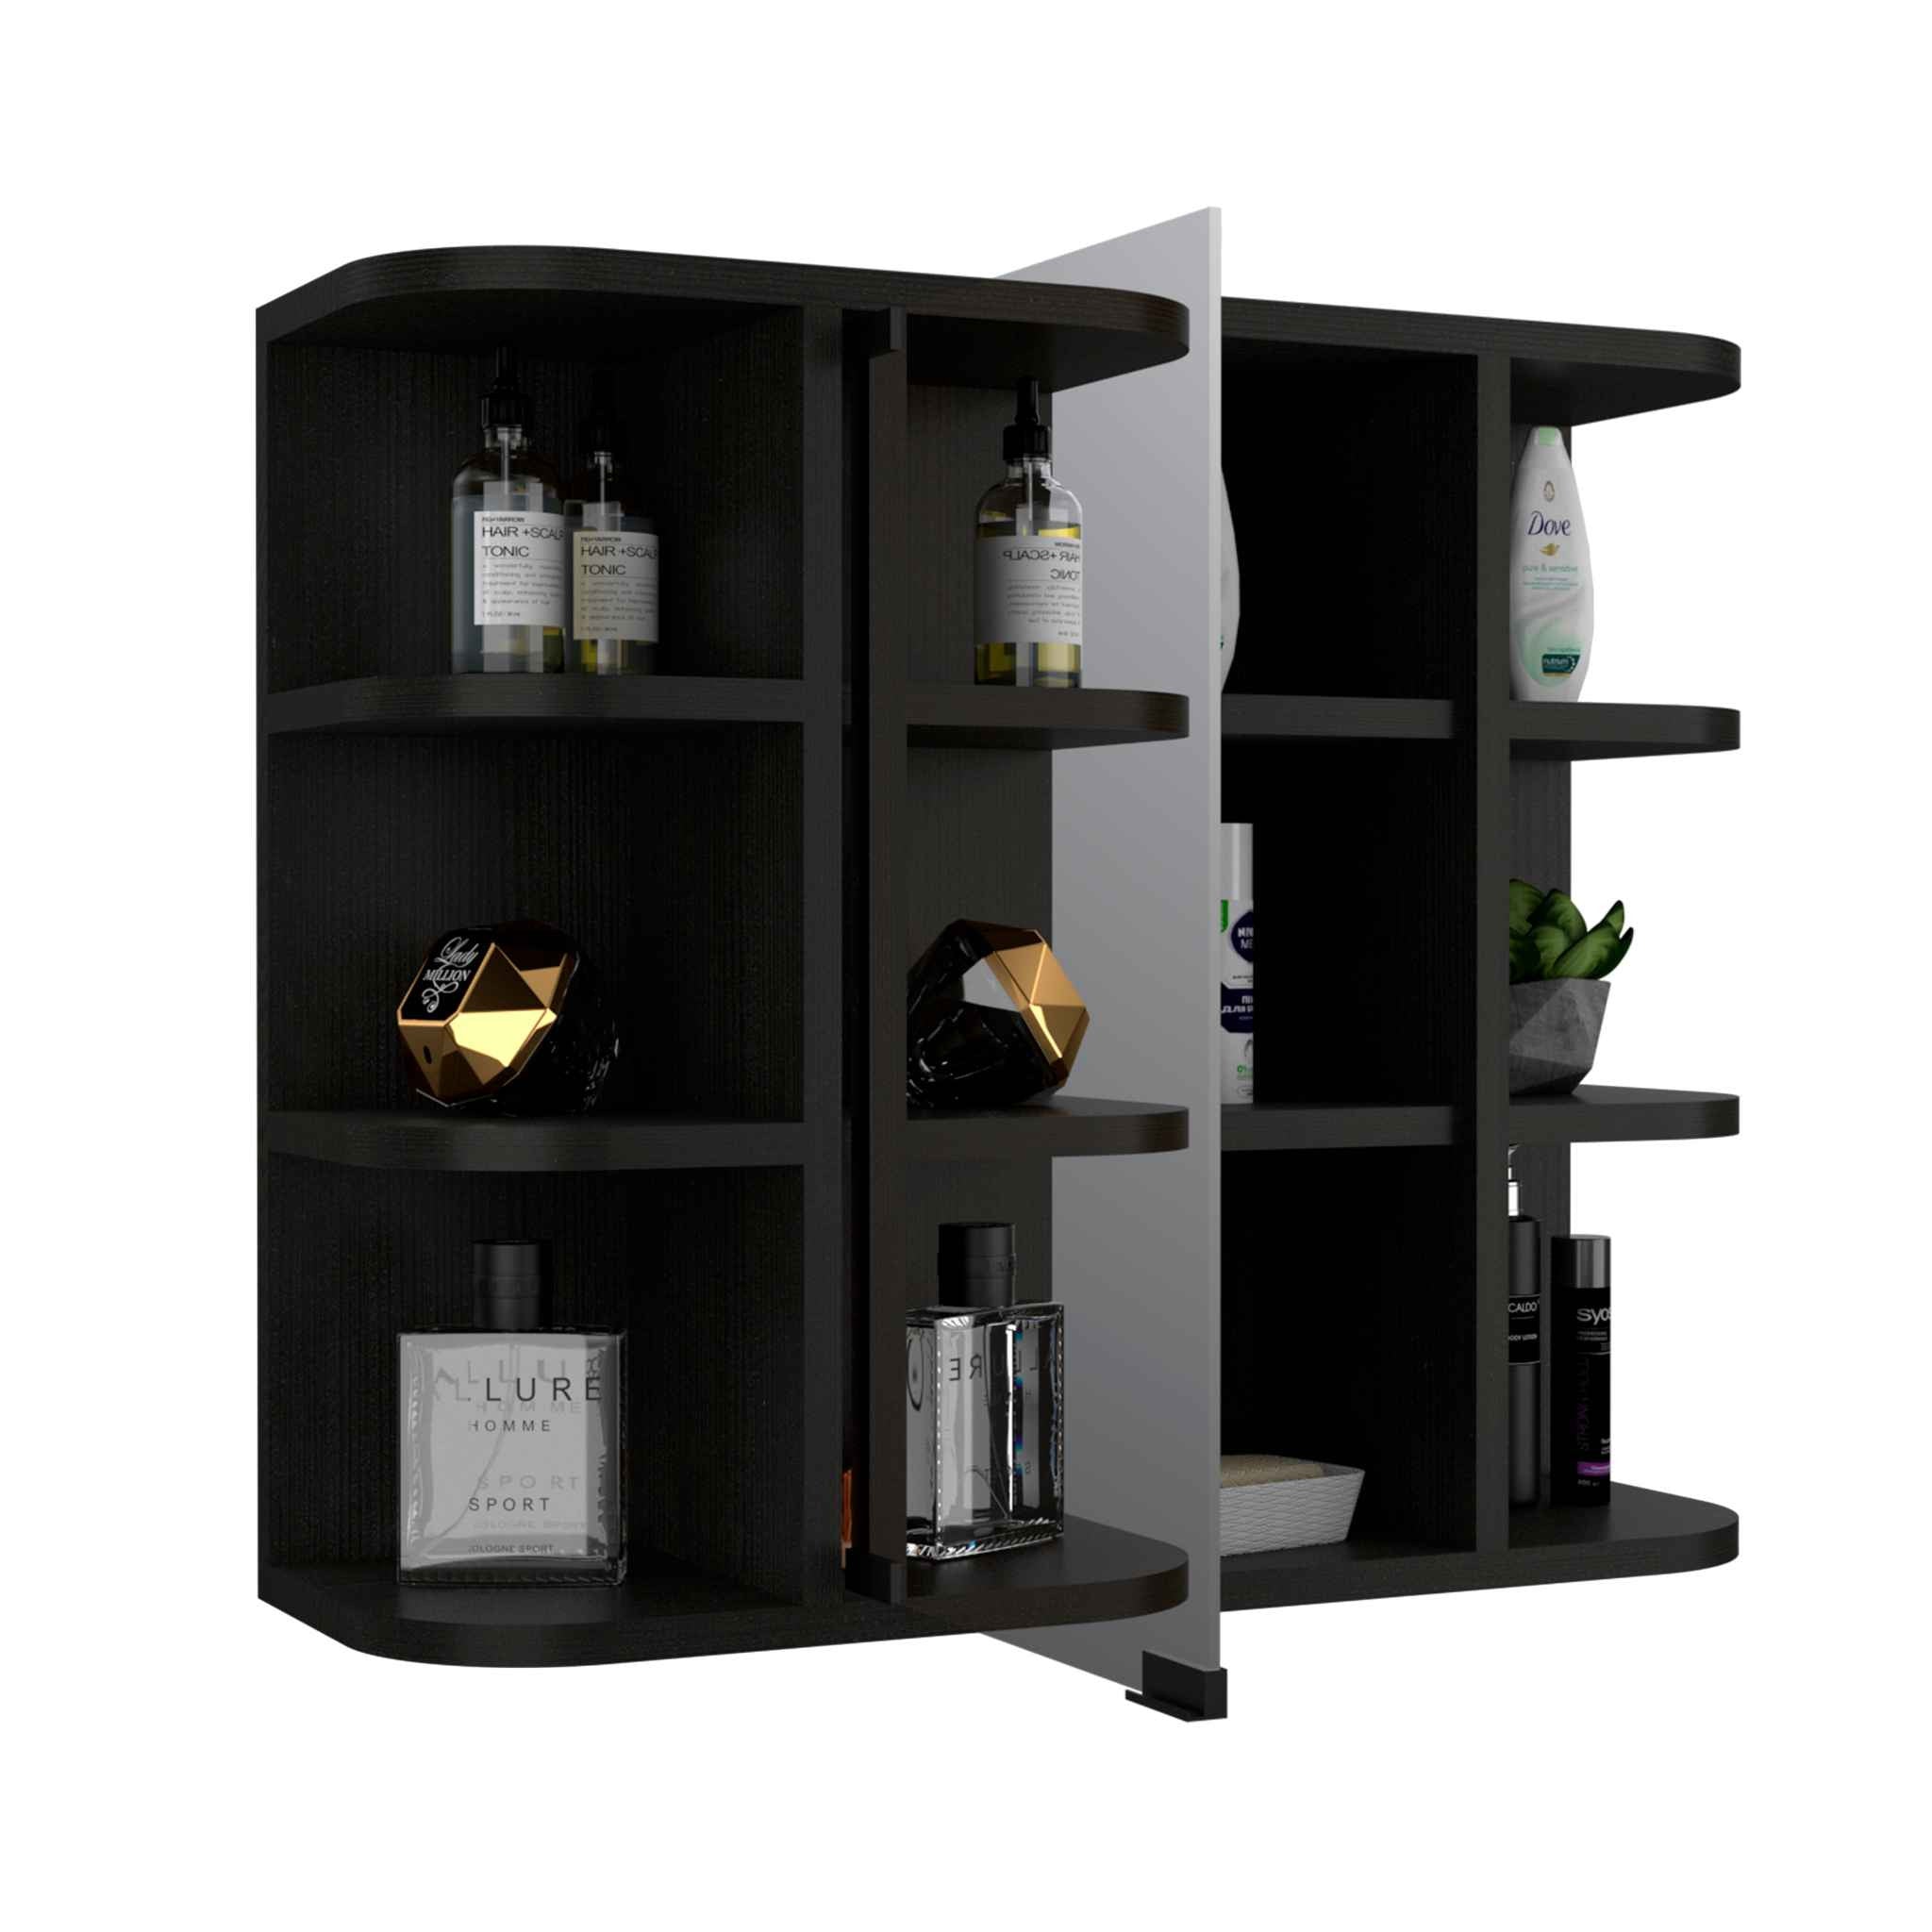 24" Black Wall Mounted Accent Cabinet With Six Shelves